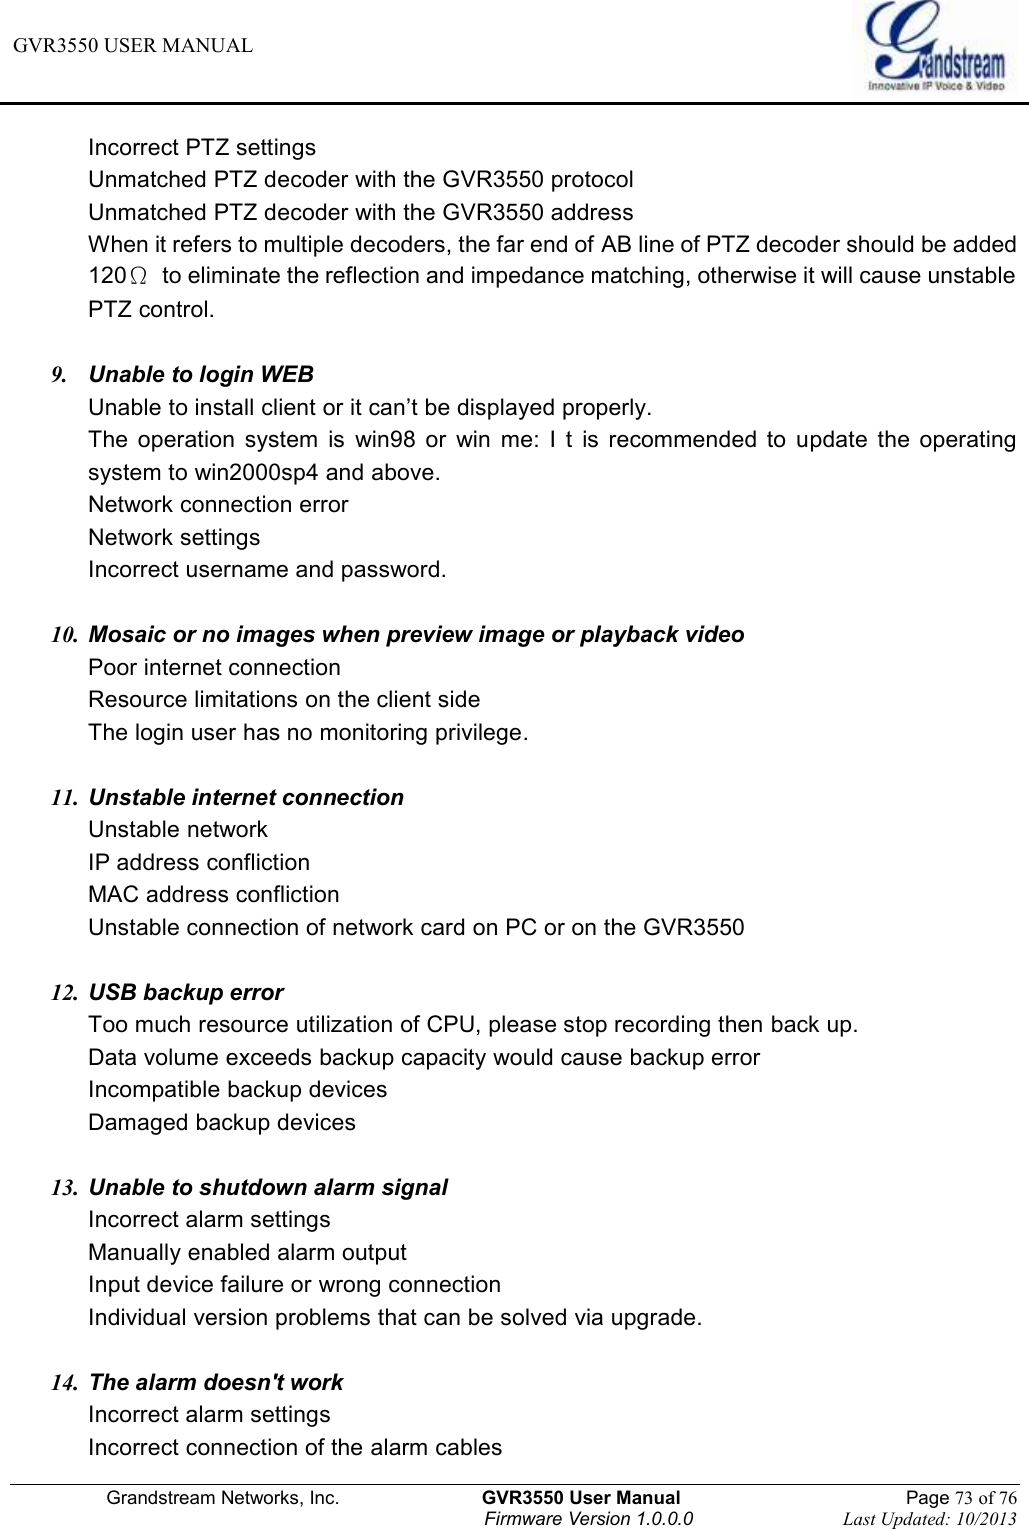 GVR3550 USER MANUAL   Grandstream Networks, Inc.                    GVR3550 User Manual                                                Page 73 of 76 Firmware Version 1.0.0.0                                Last Updated: 10/2013  Incorrect PTZ settings Unmatched PTZ decoder with the GVR3550 protocol Unmatched PTZ decoder with the GVR3550 address When it refers to multiple decoders, the far end of AB line of PTZ decoder should be added 120Ω  to eliminate the reflection and impedance matching, otherwise it will cause unstable PTZ control.  9.  Unable to login WEB Unable to install client or it can’t be displayed properly.   The  operation  system  is  win98  or  win  me:  I  t  is  recommended  to  update  the  operating system to win2000sp4 and above. Network connection error Network settings Incorrect username and password.  10. Mosaic or no images when preview image or playback video Poor internet connection Resource limitations on the client side The login user has no monitoring privilege.  11. Unstable internet connection Unstable network IP address confliction MAC address confliction Unstable connection of network card on PC or on the GVR3550    12. USB backup error Too much resource utilization of CPU, please stop recording then back up.   Data volume exceeds backup capacity would cause backup error Incompatible backup devices Damaged backup devices  13. Unable to shutdown alarm signal Incorrect alarm settings Manually enabled alarm output Input device failure or wrong connection Individual version problems that can be solved via upgrade.  14. The alarm doesn&apos;t work Incorrect alarm settings   Incorrect connection of the alarm cables 